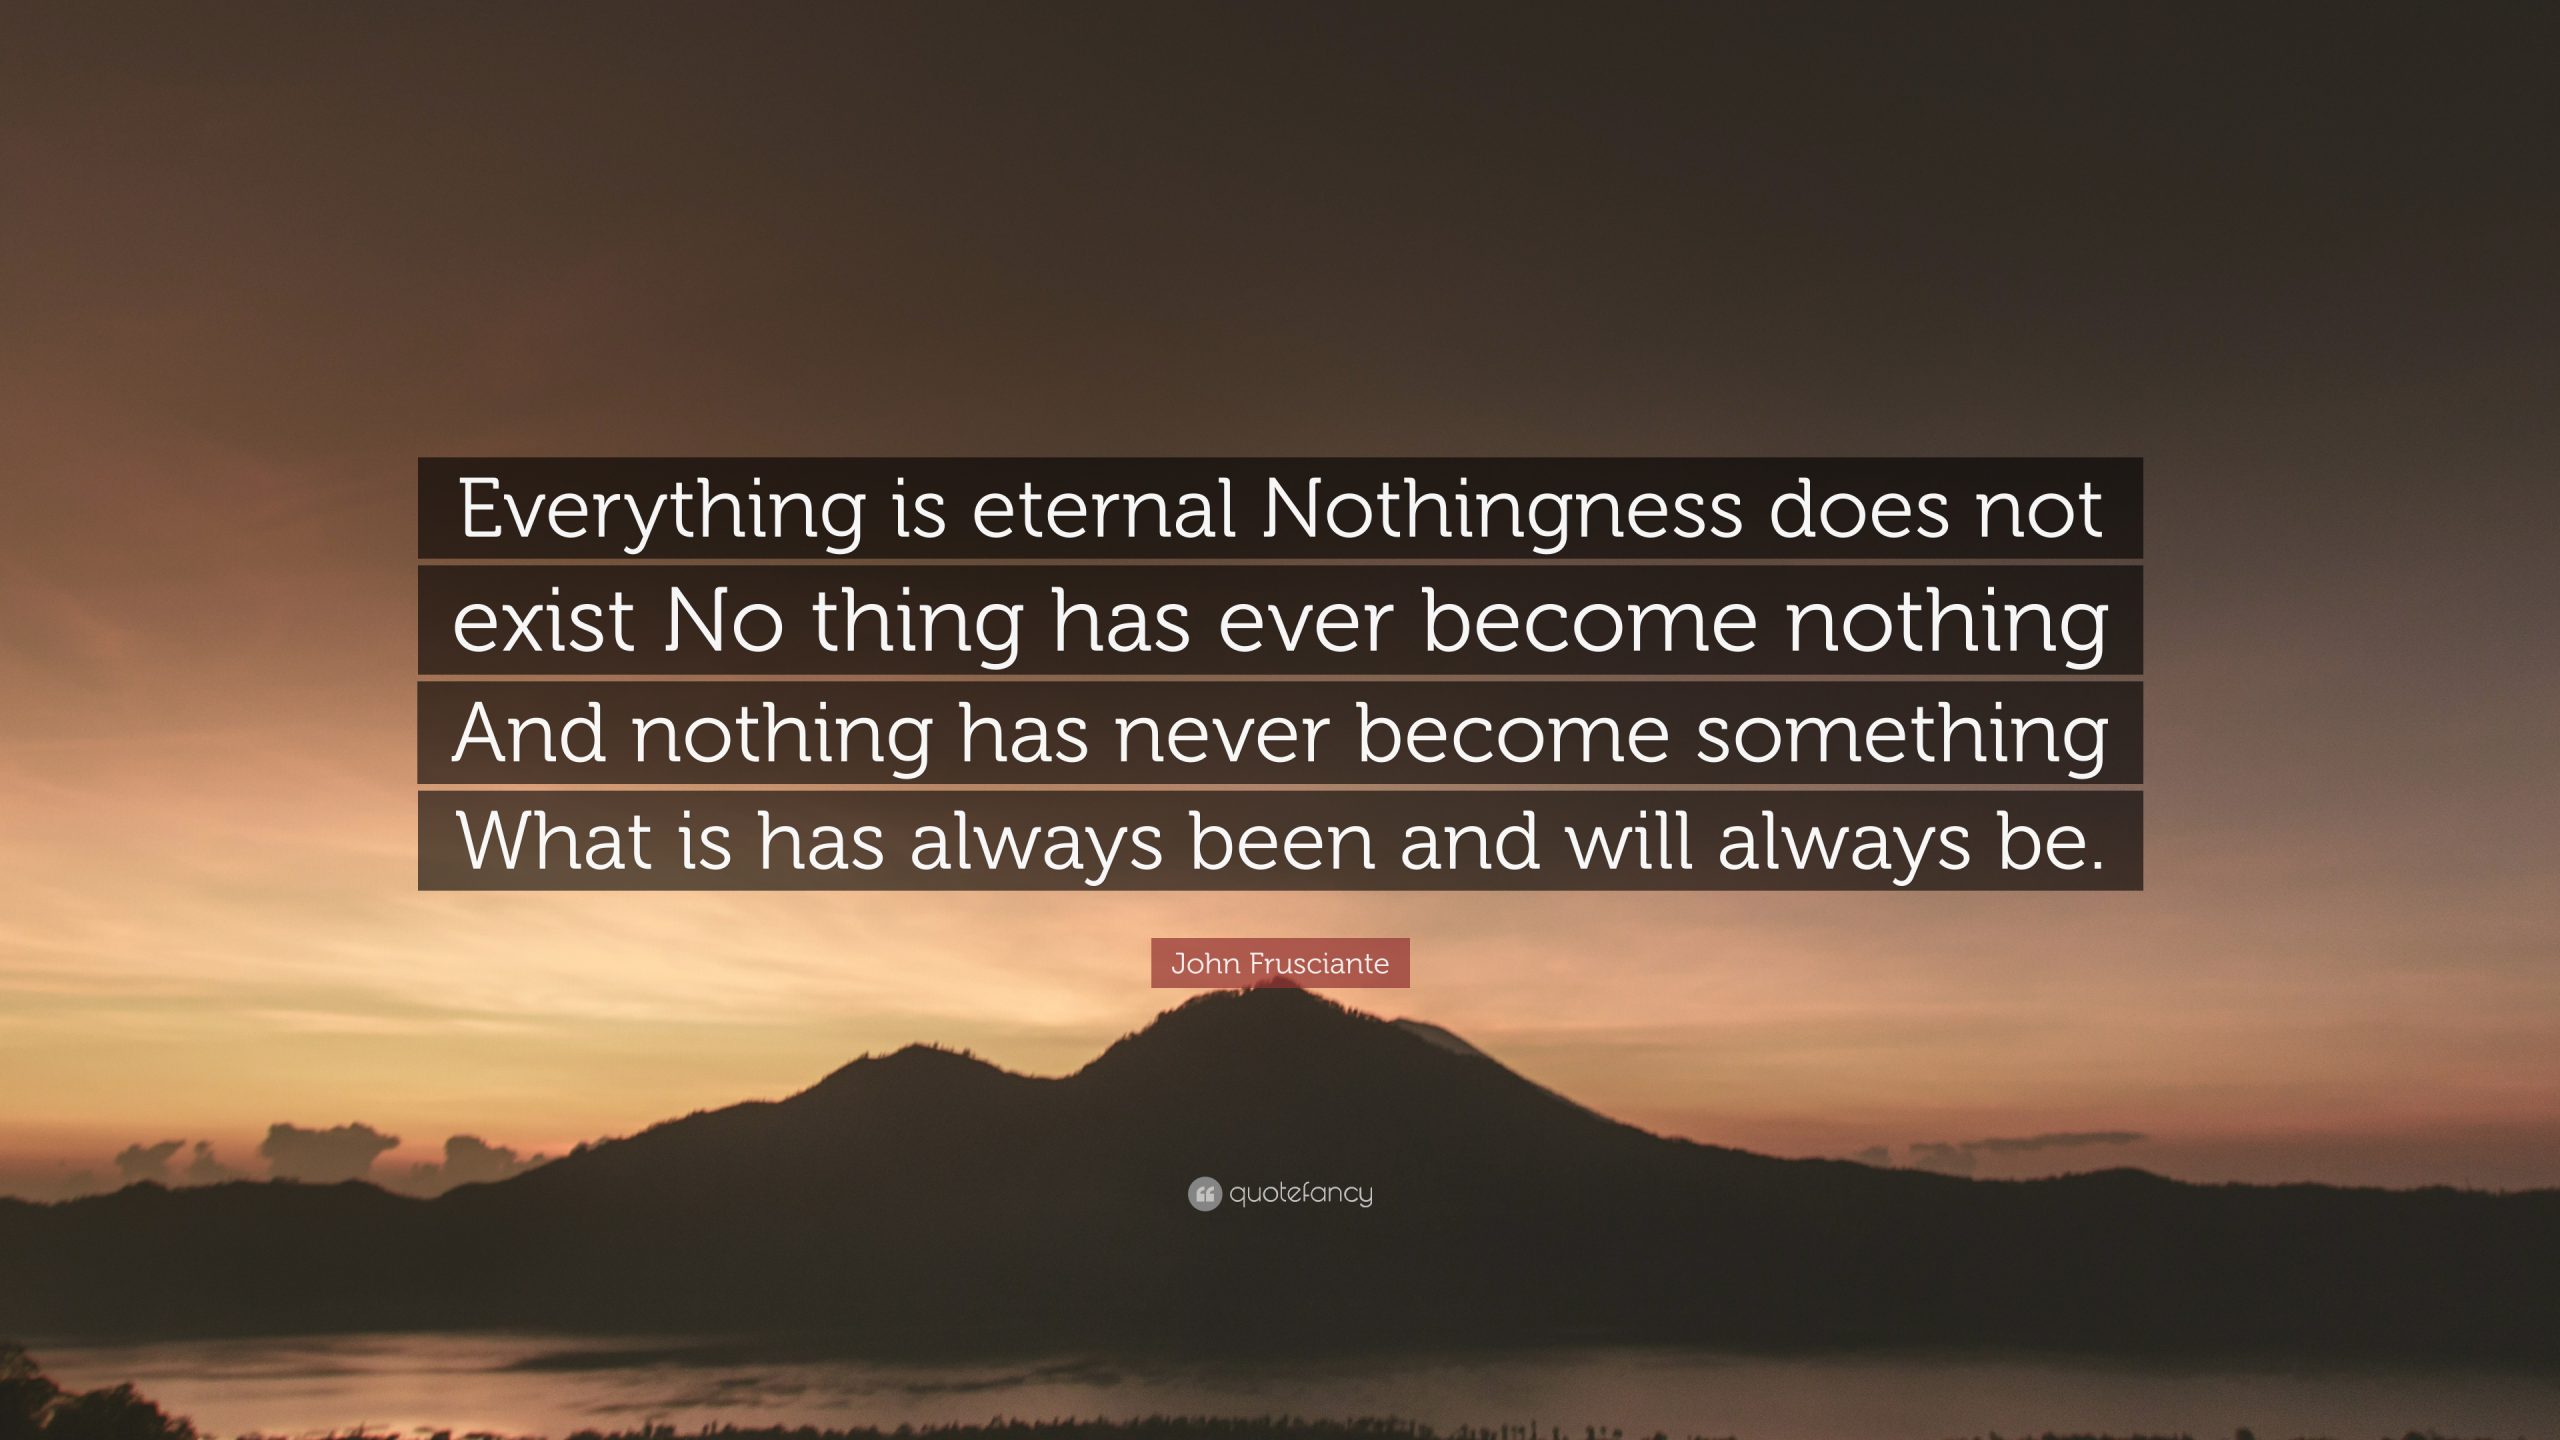 Does Nothingness Exist?